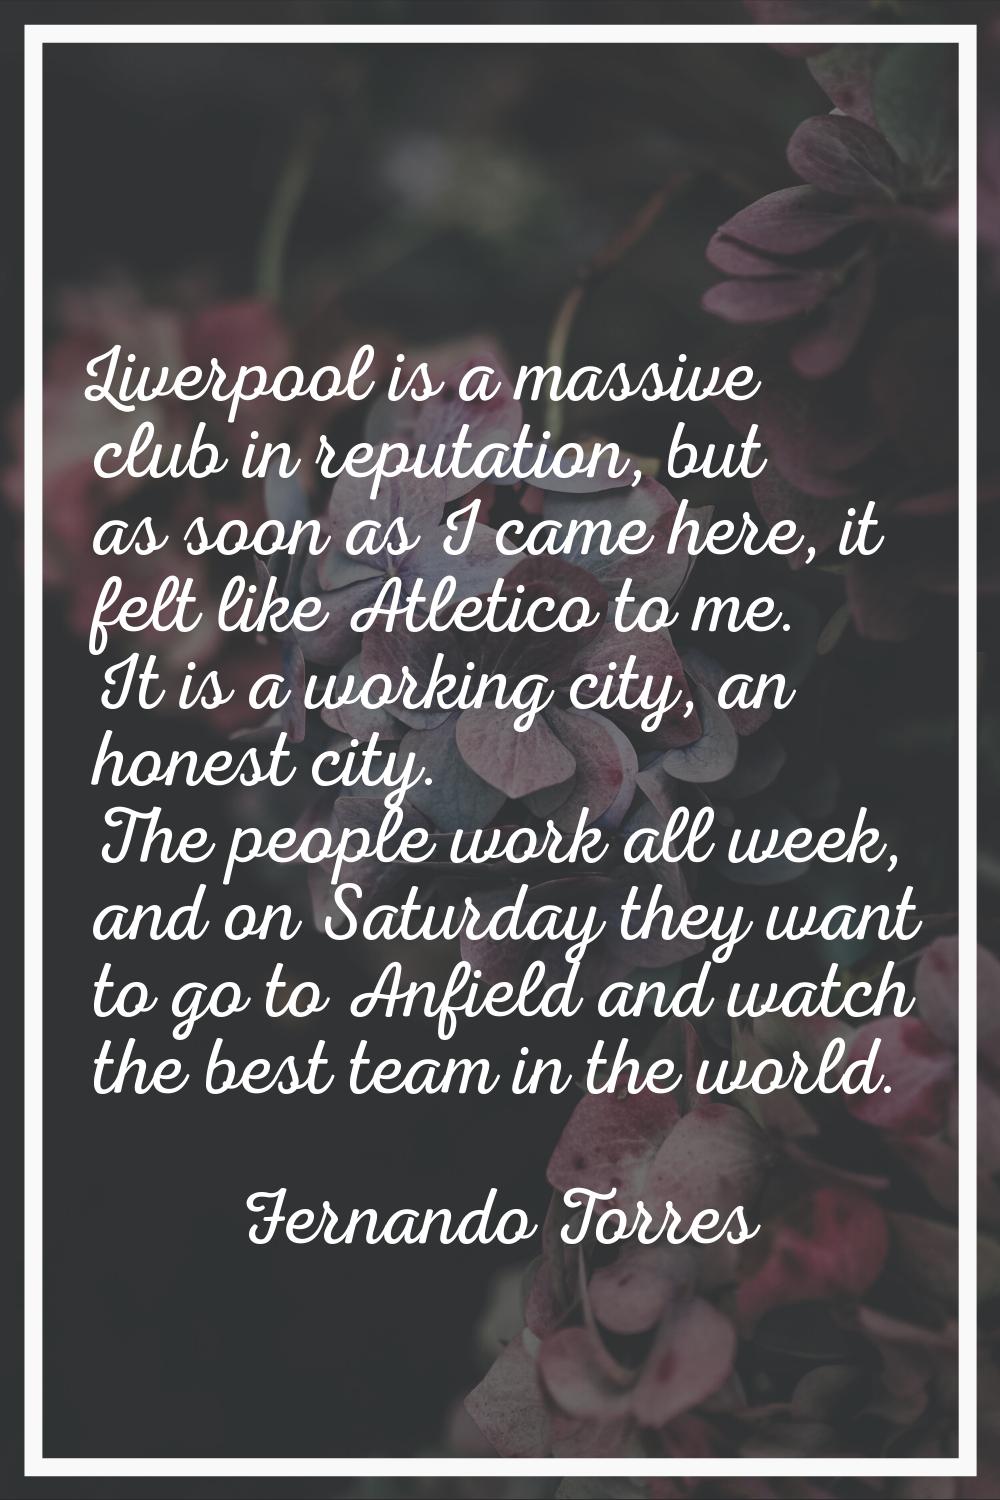 Liverpool is a massive club in reputation, but as soon as I came here, it felt like Atletico to me.